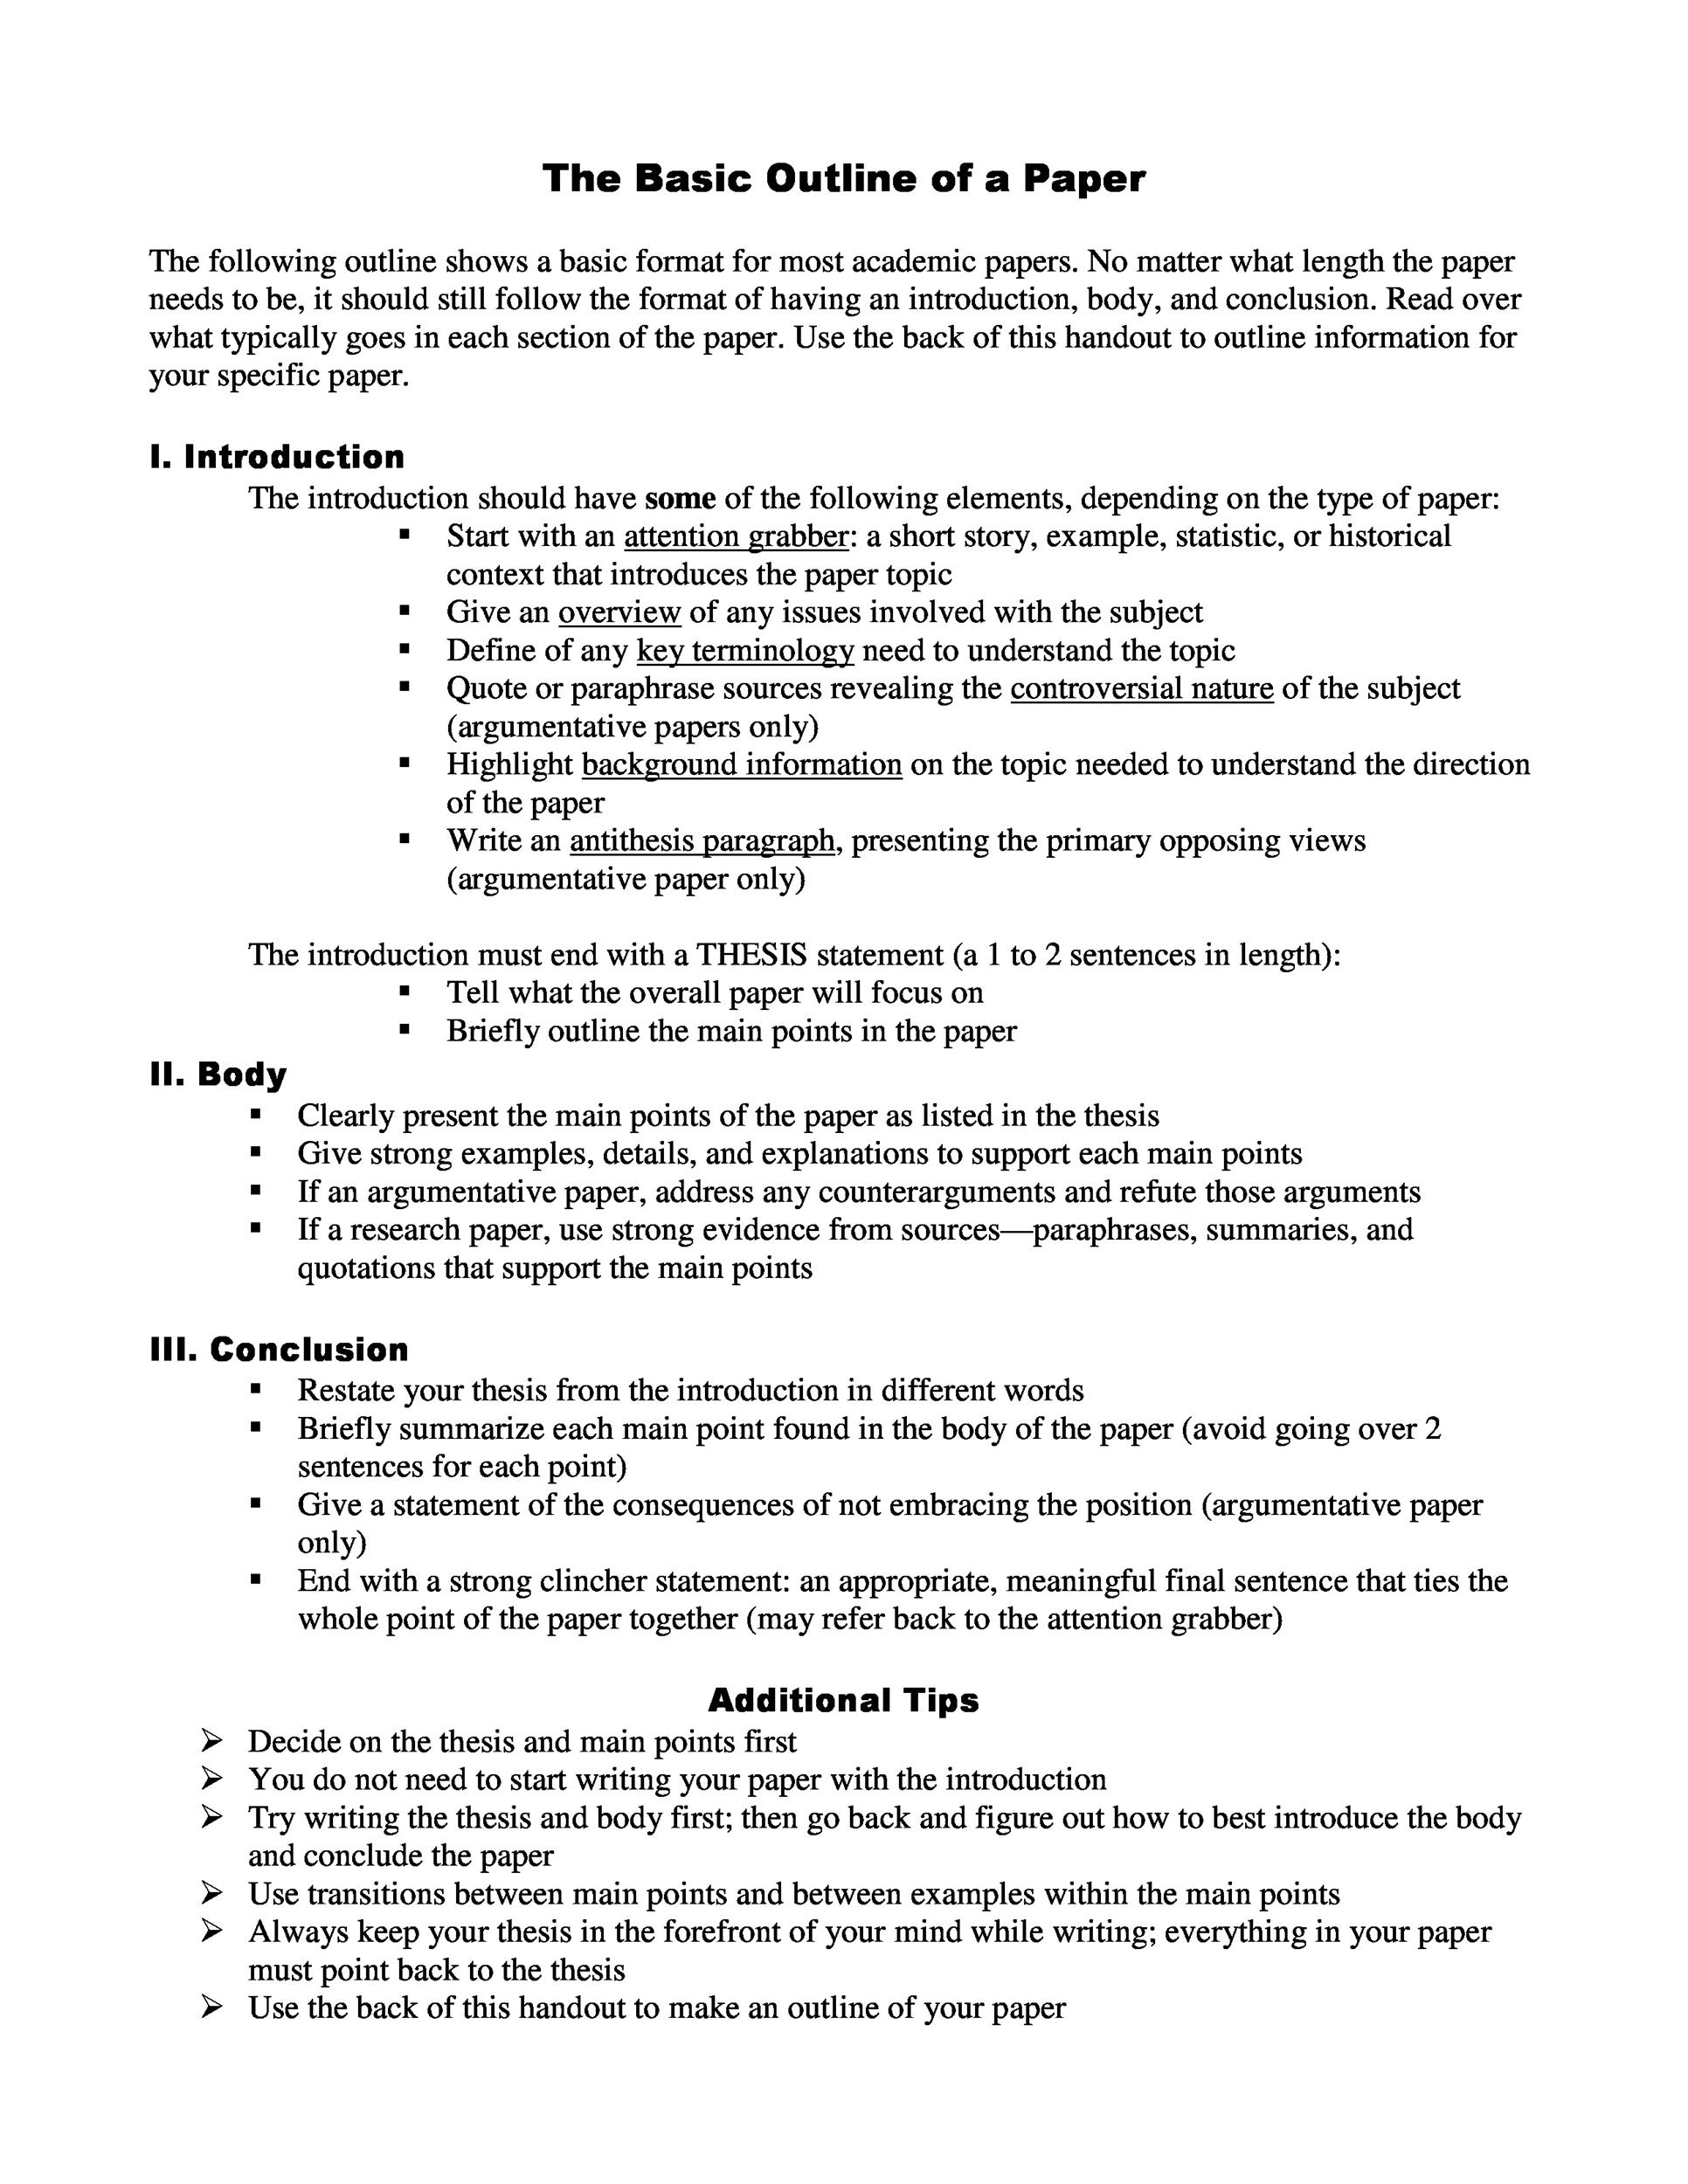 mla guidelines for formatting a research paper